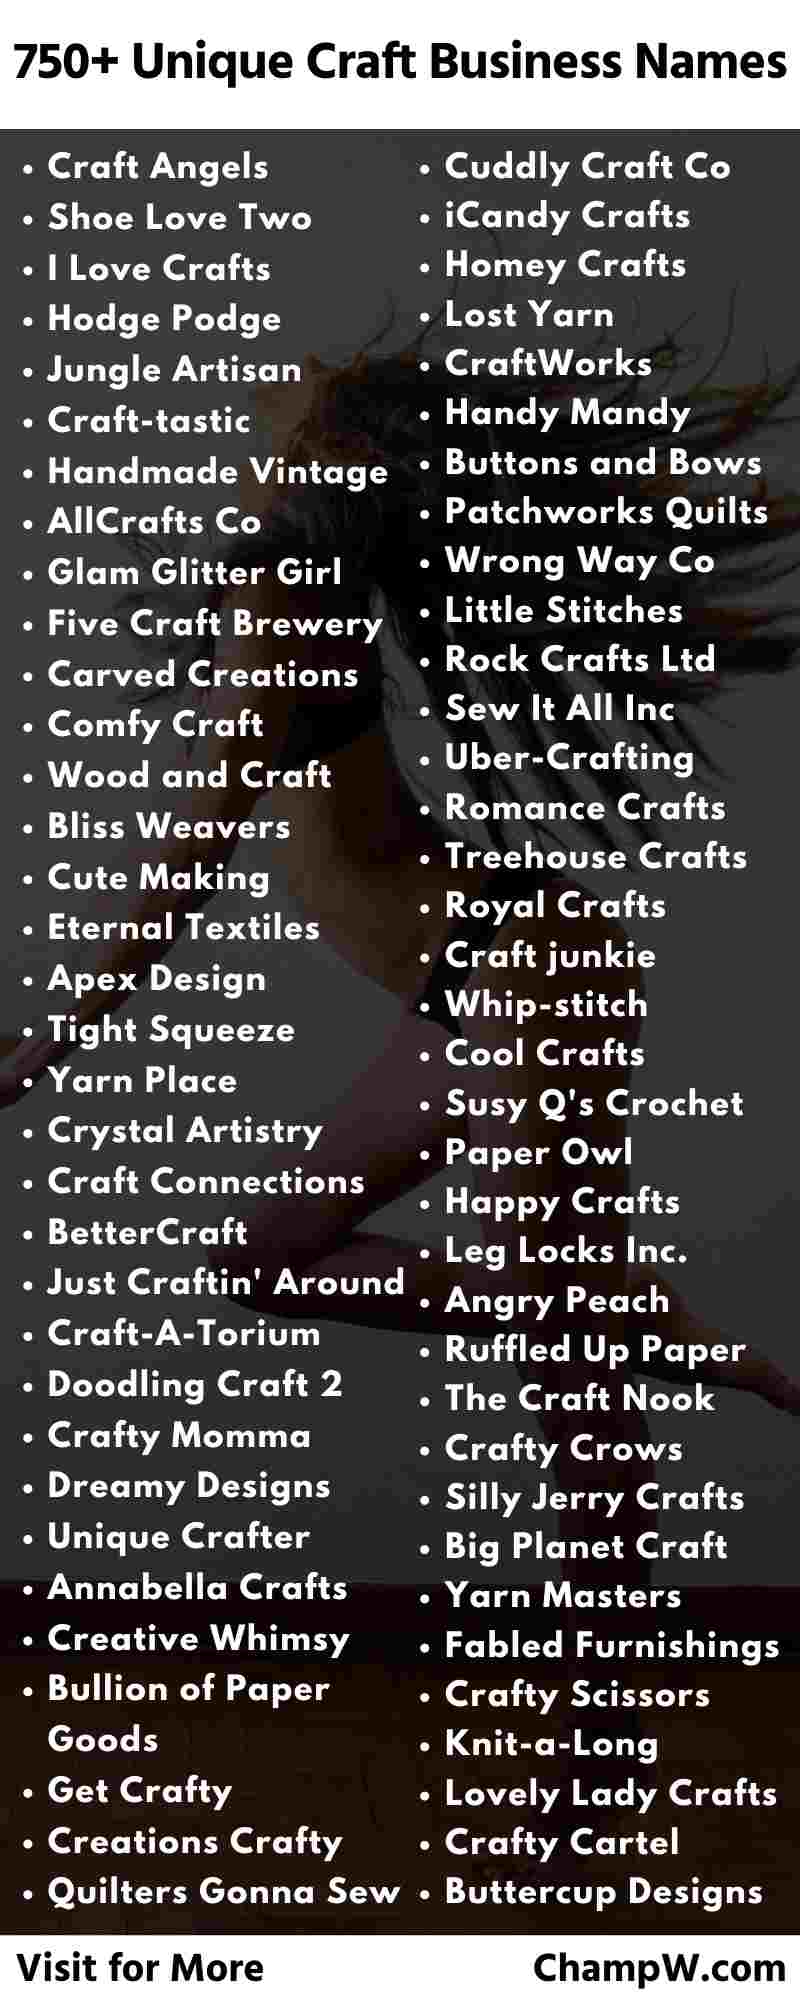 Craft Business Names Infographic